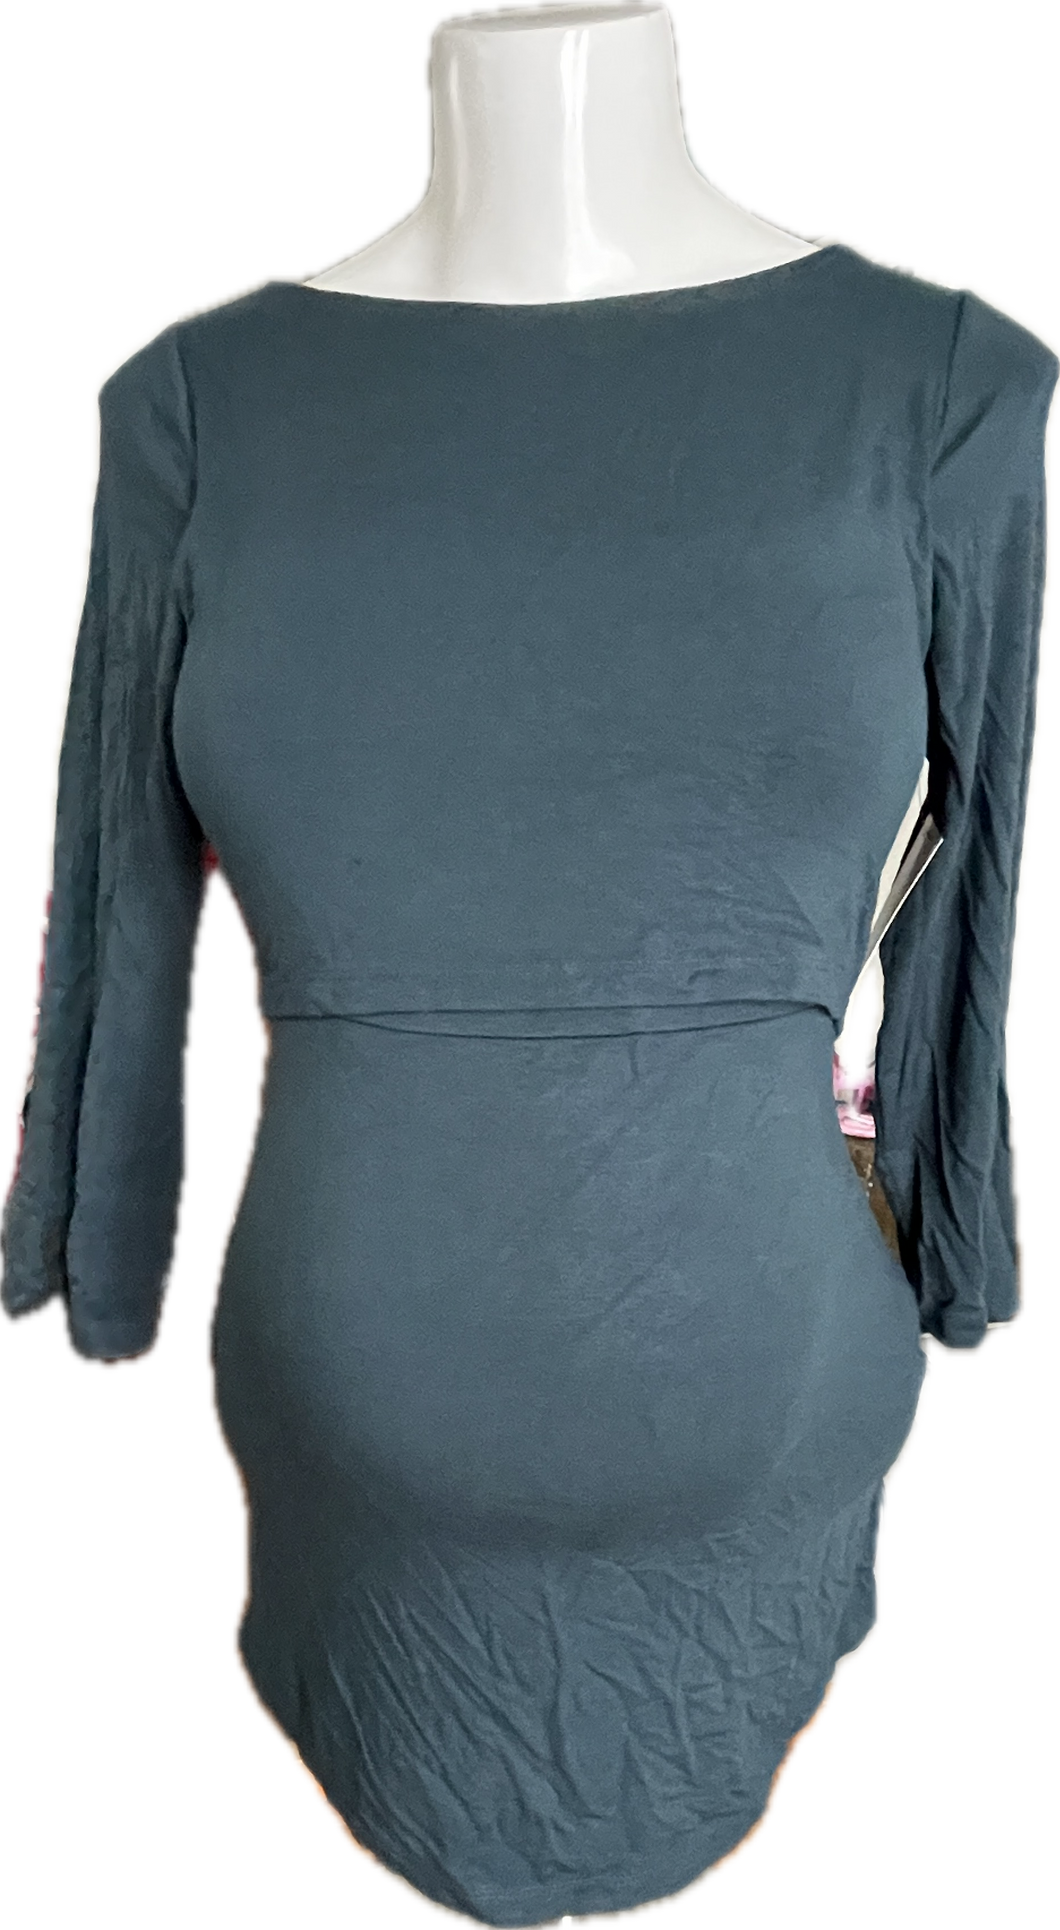 XS LOVE by Gap Maternity Long Sleeve Feeing top in Teal